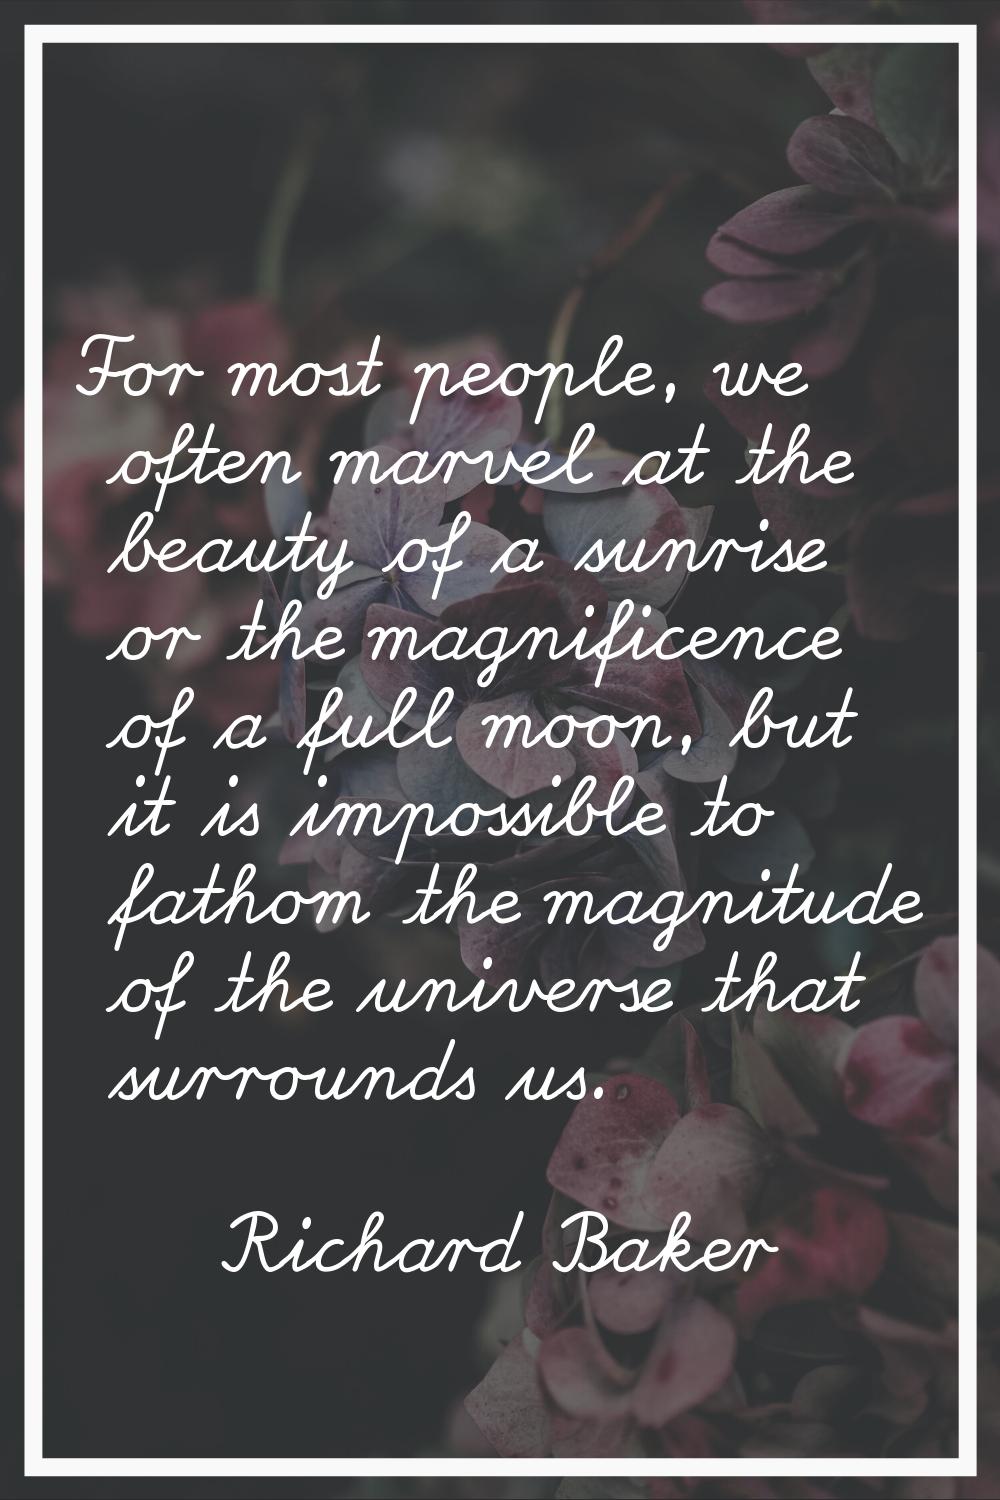 For most people, we often marvel at the beauty of a sunrise or the magnificence of a full moon, but